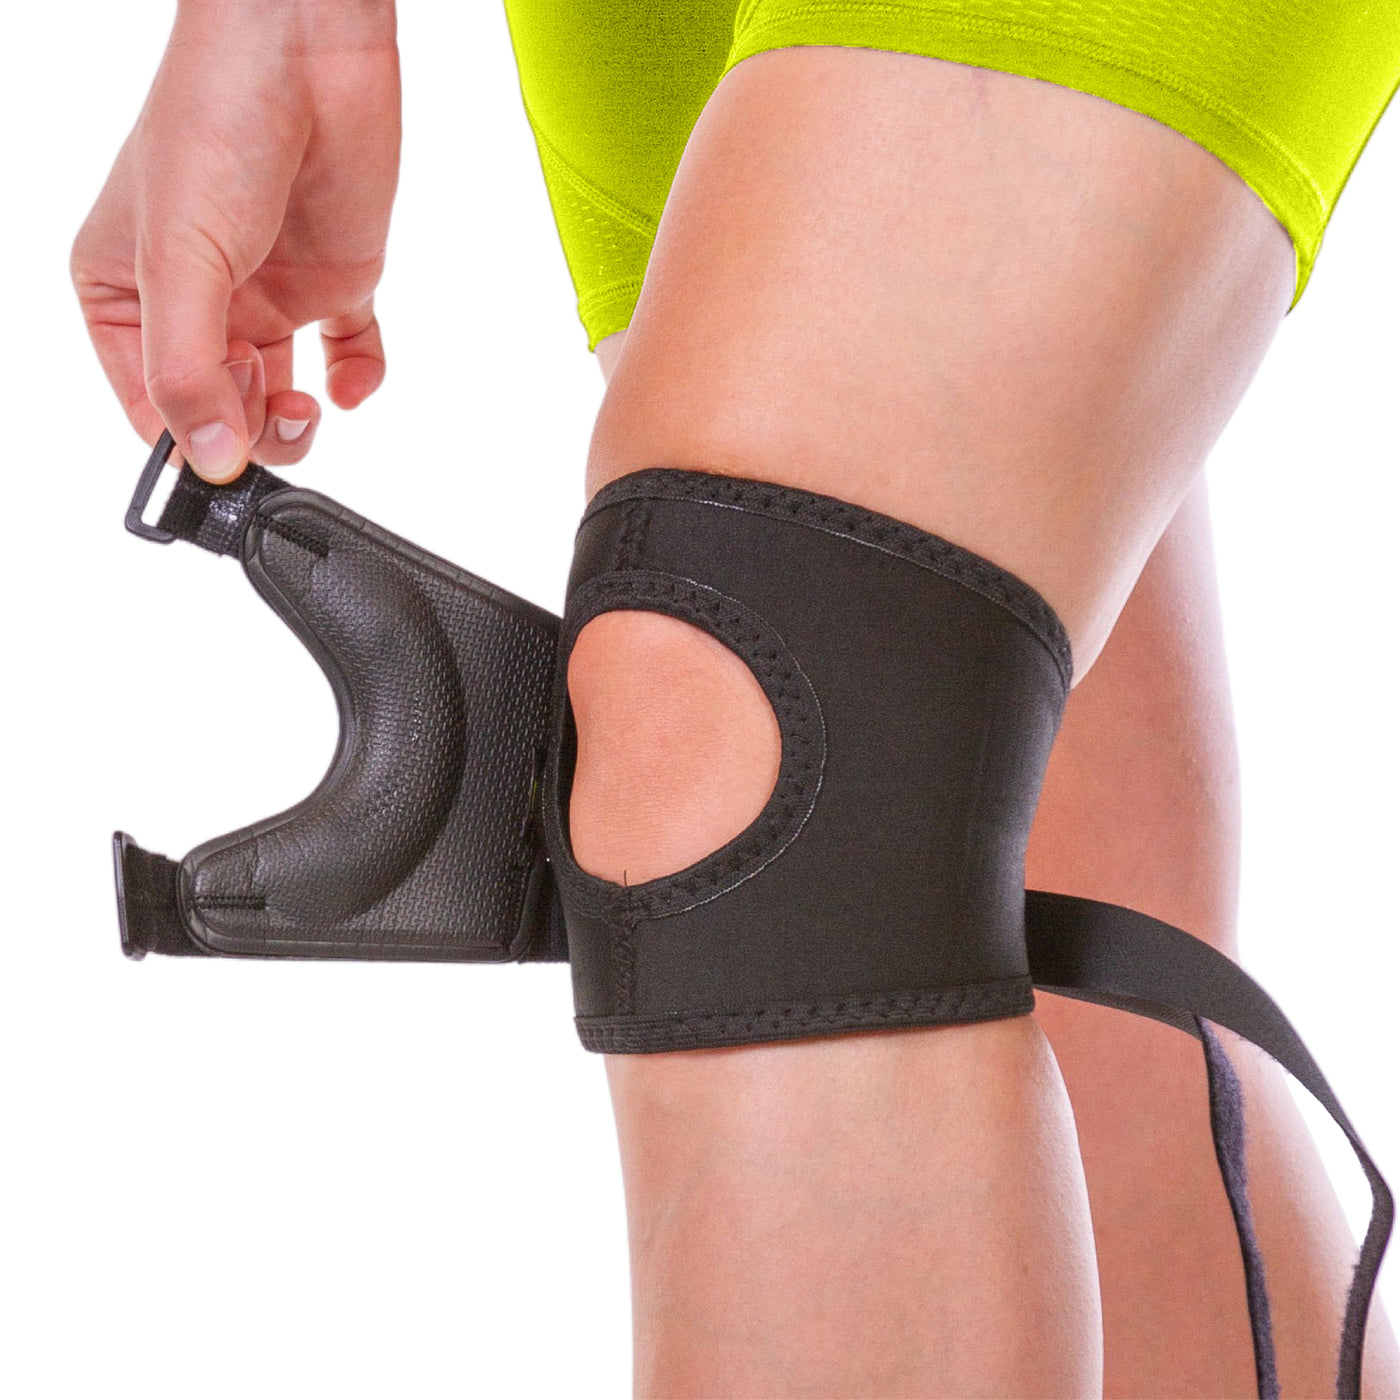 Stabilizing Patella Knee Strap | Knee Brace for Running, Cycling, Hiking,  and Sports | Knee Pain Relief and Support, Knee Stabilizer Brace For